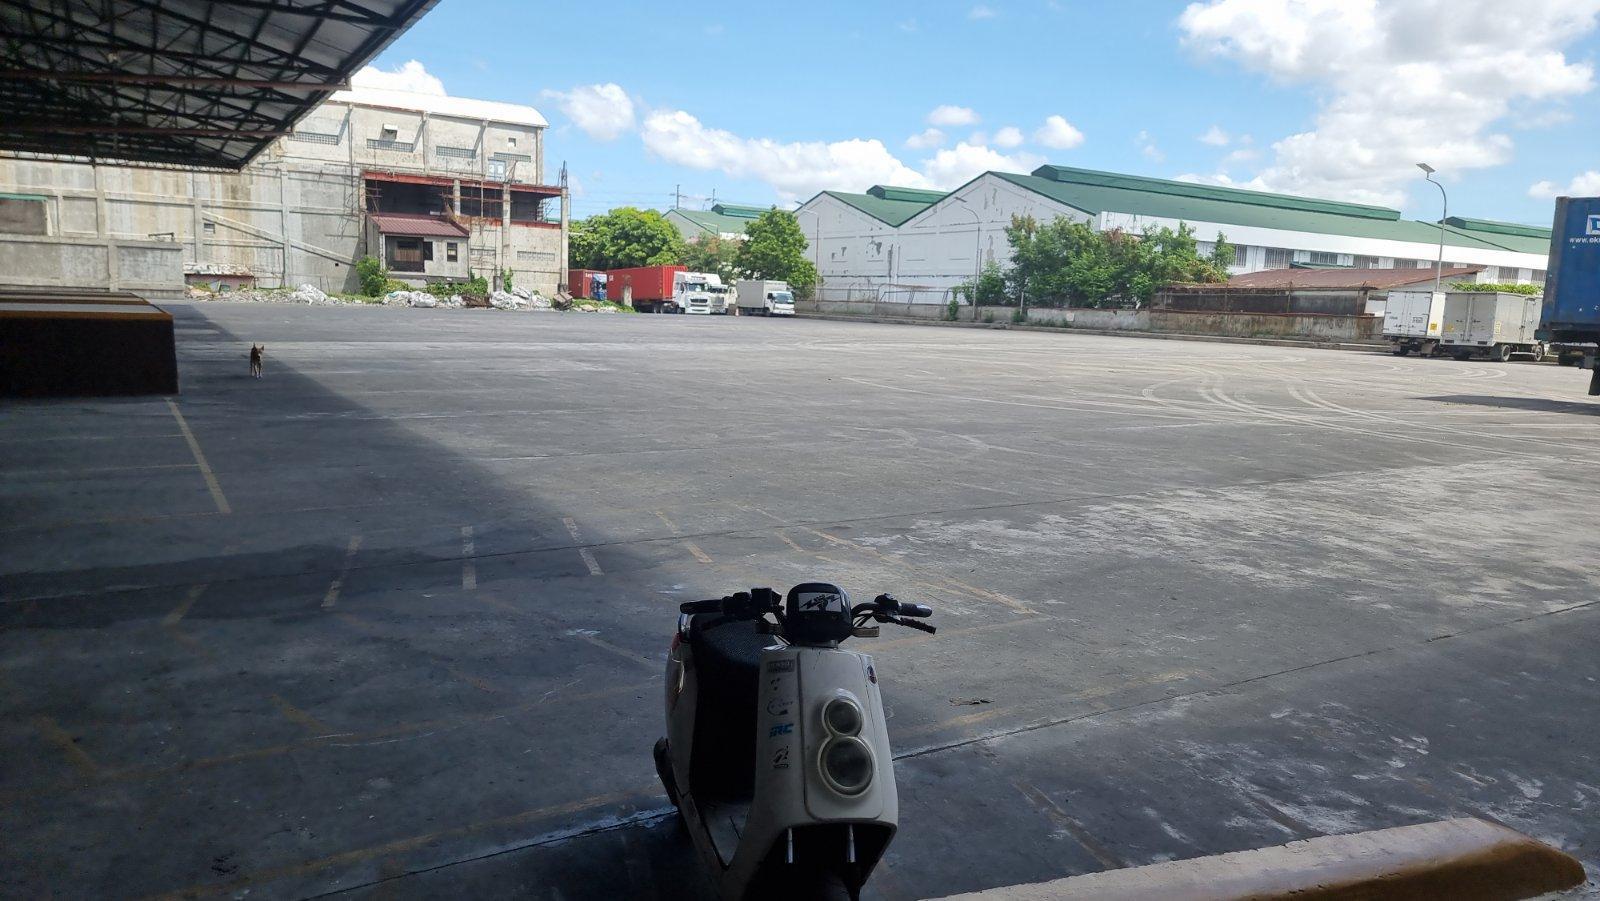 Warehouse Space Rent Lease 30000 sqm Pasig City Philippines